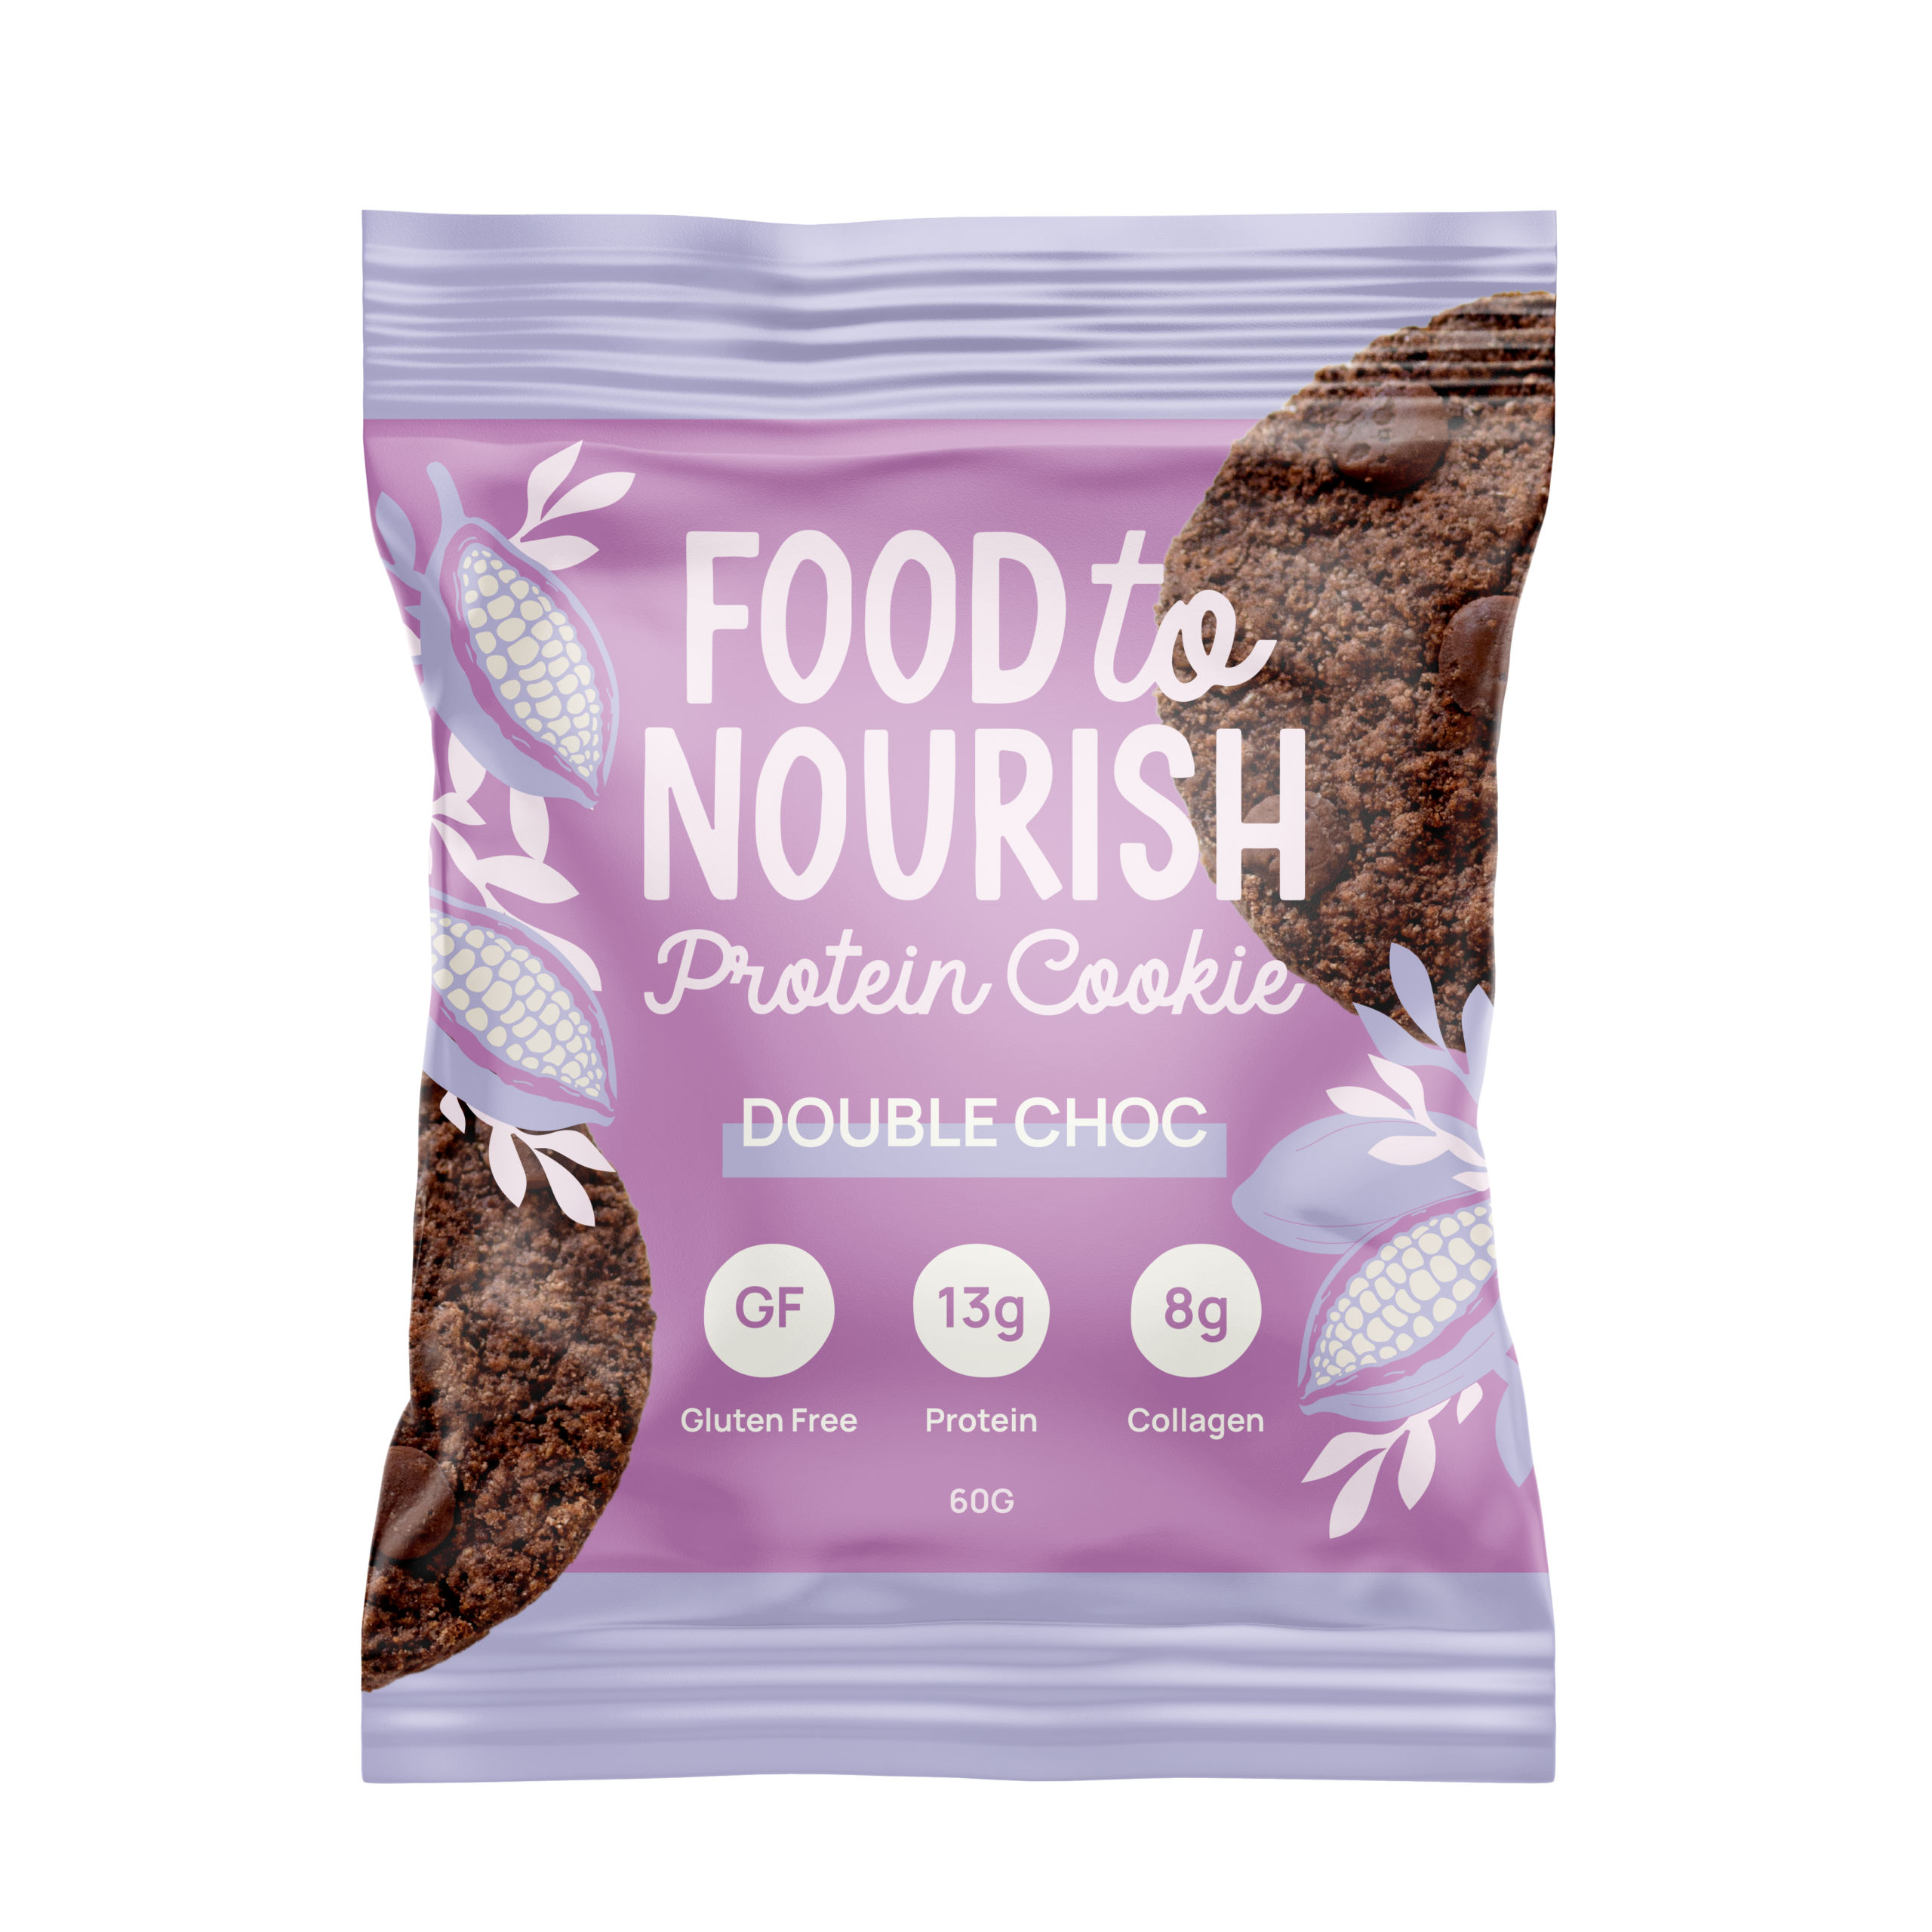 Food to Nourish Protein Cookie Double Choc 12 x 60g